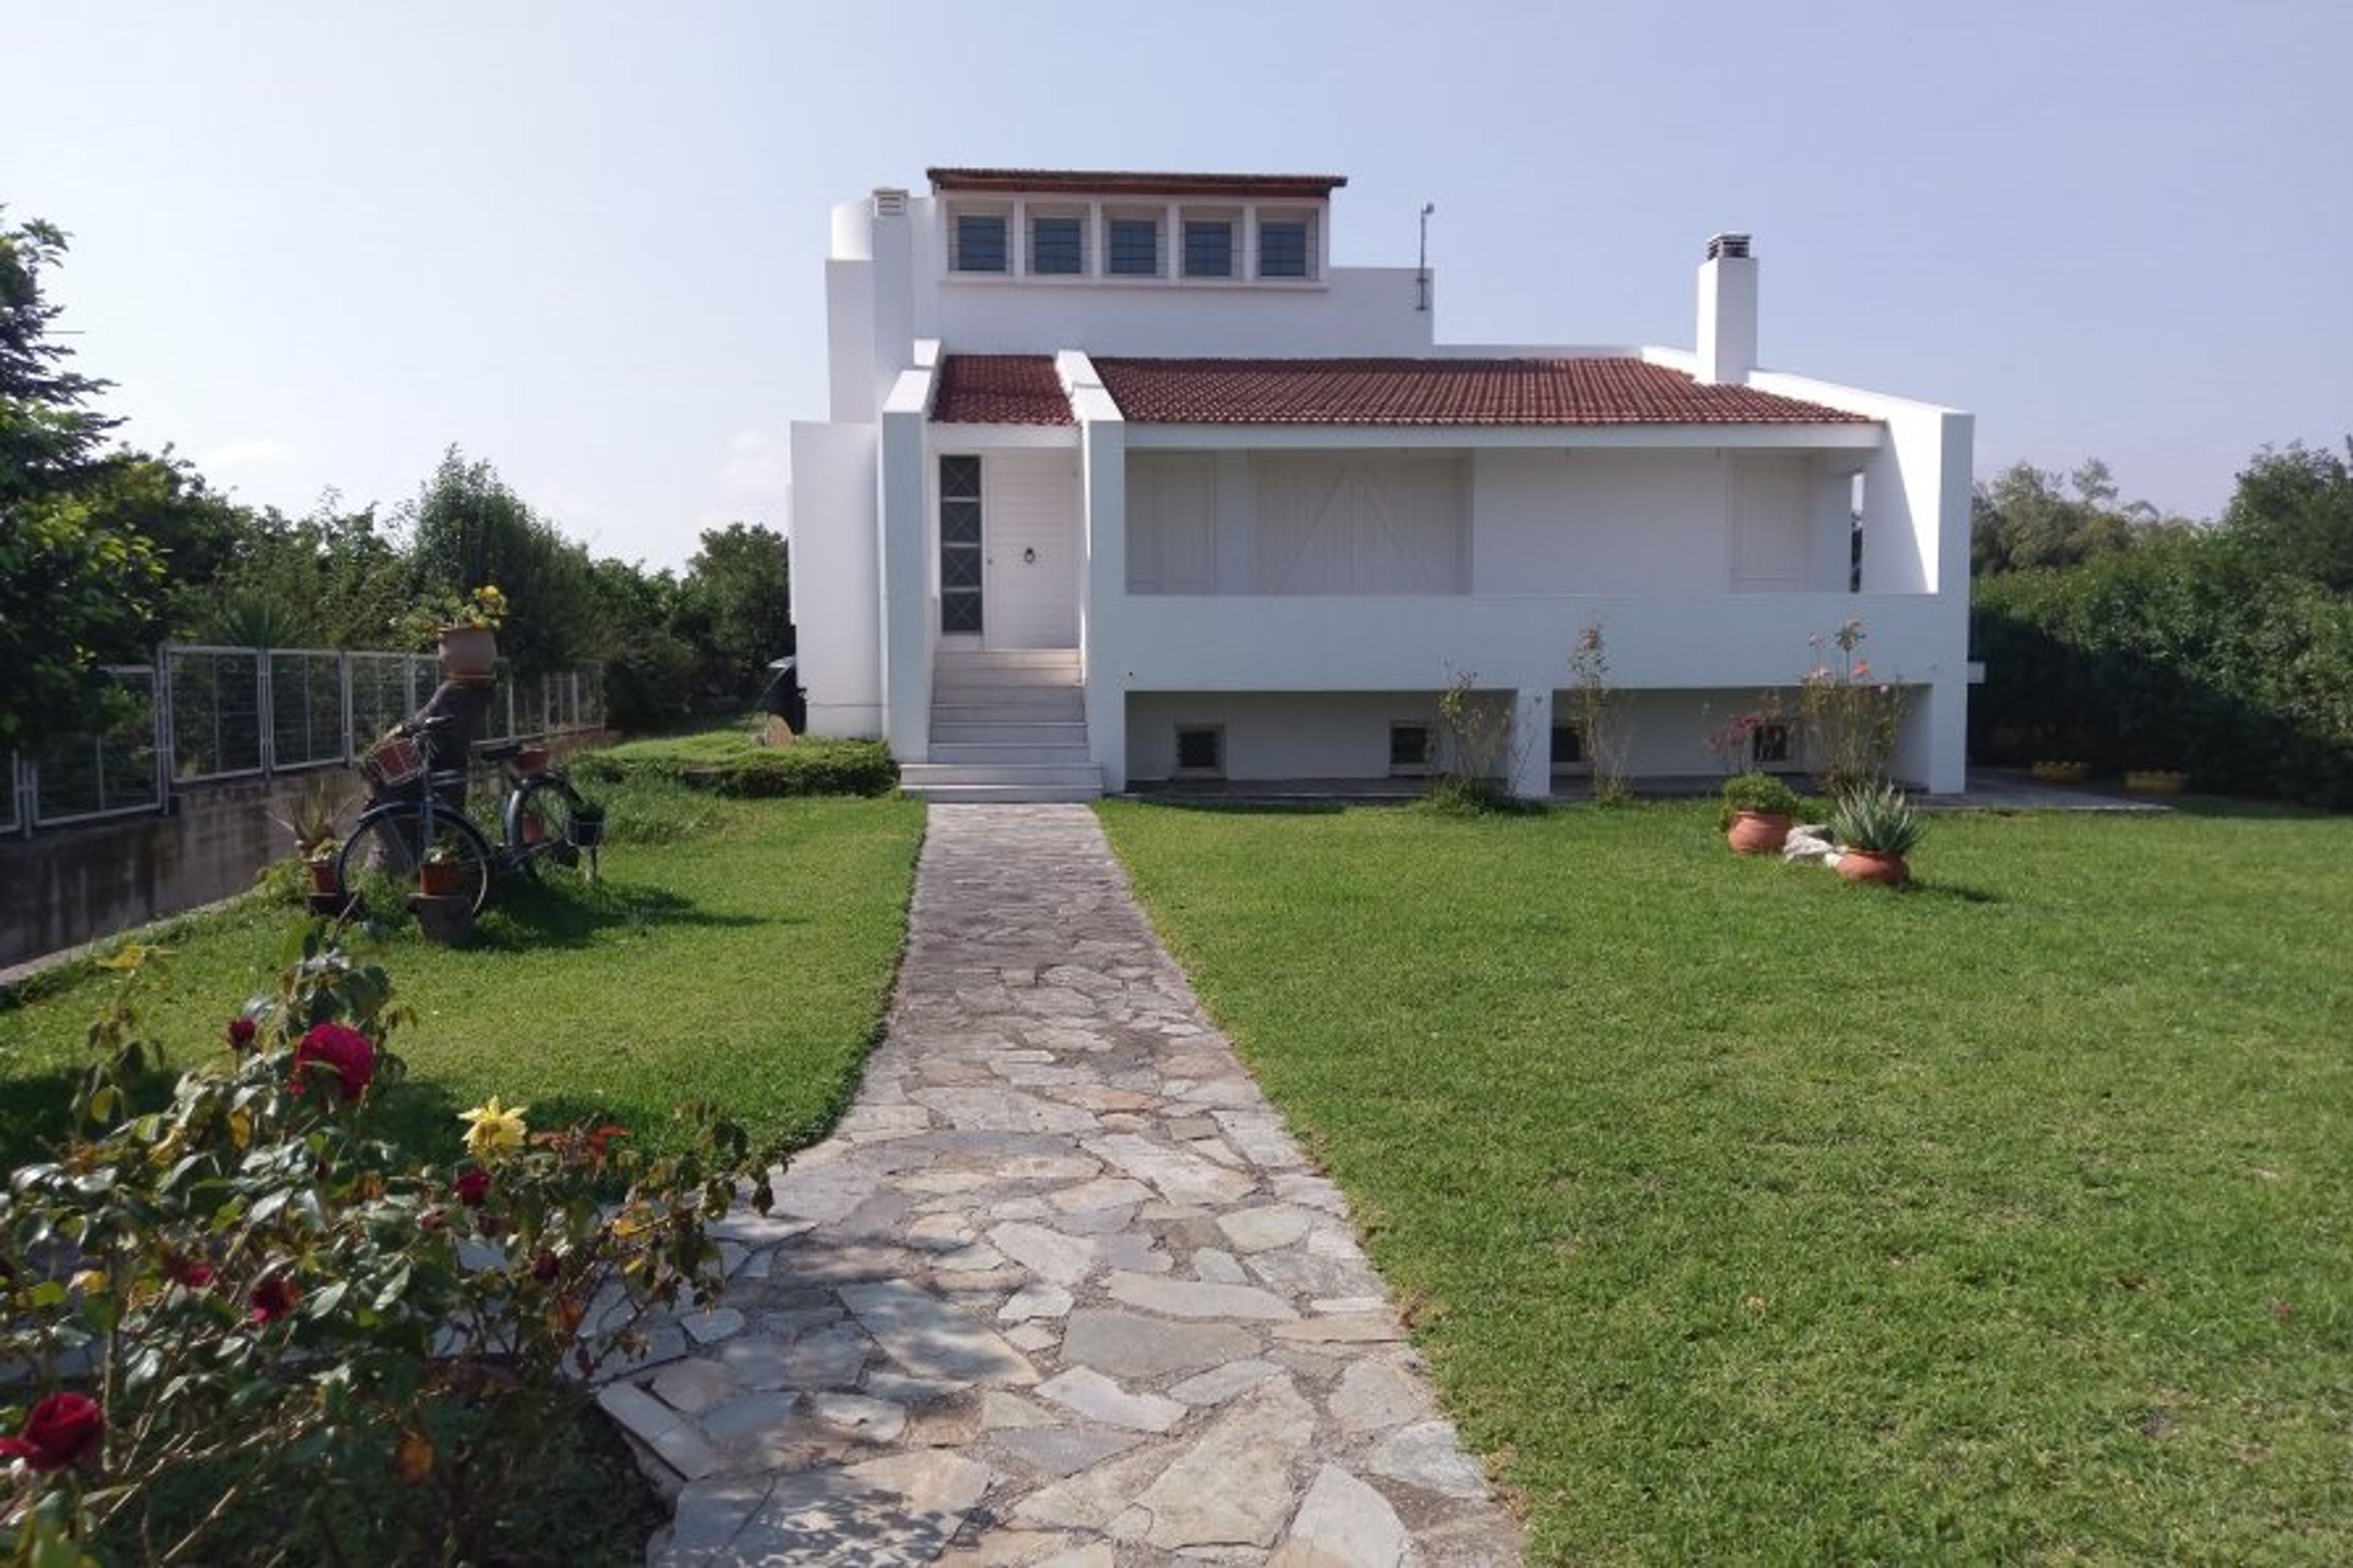 Holiday home next to orange tree orchard, 185 sq.m